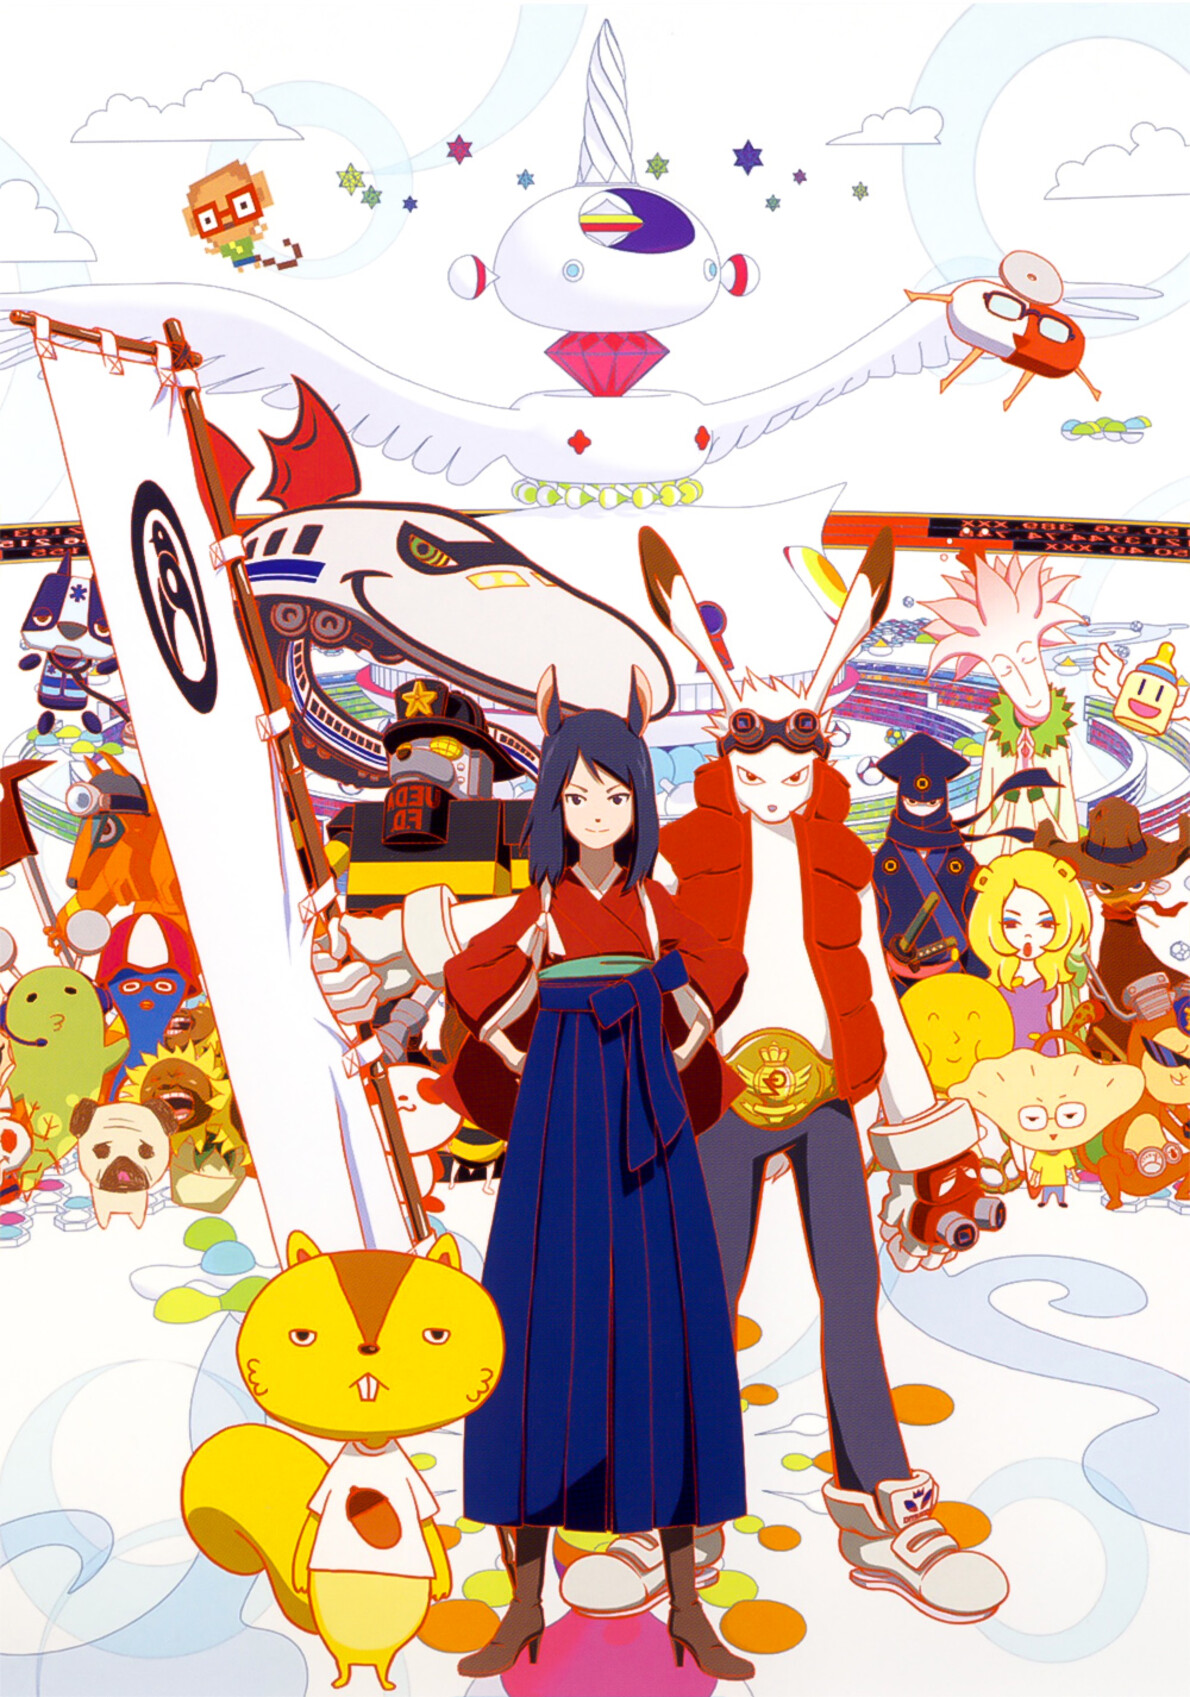 Mamoru Hosodas Belle May Be Beauty and the Beast Meets Summer Wars